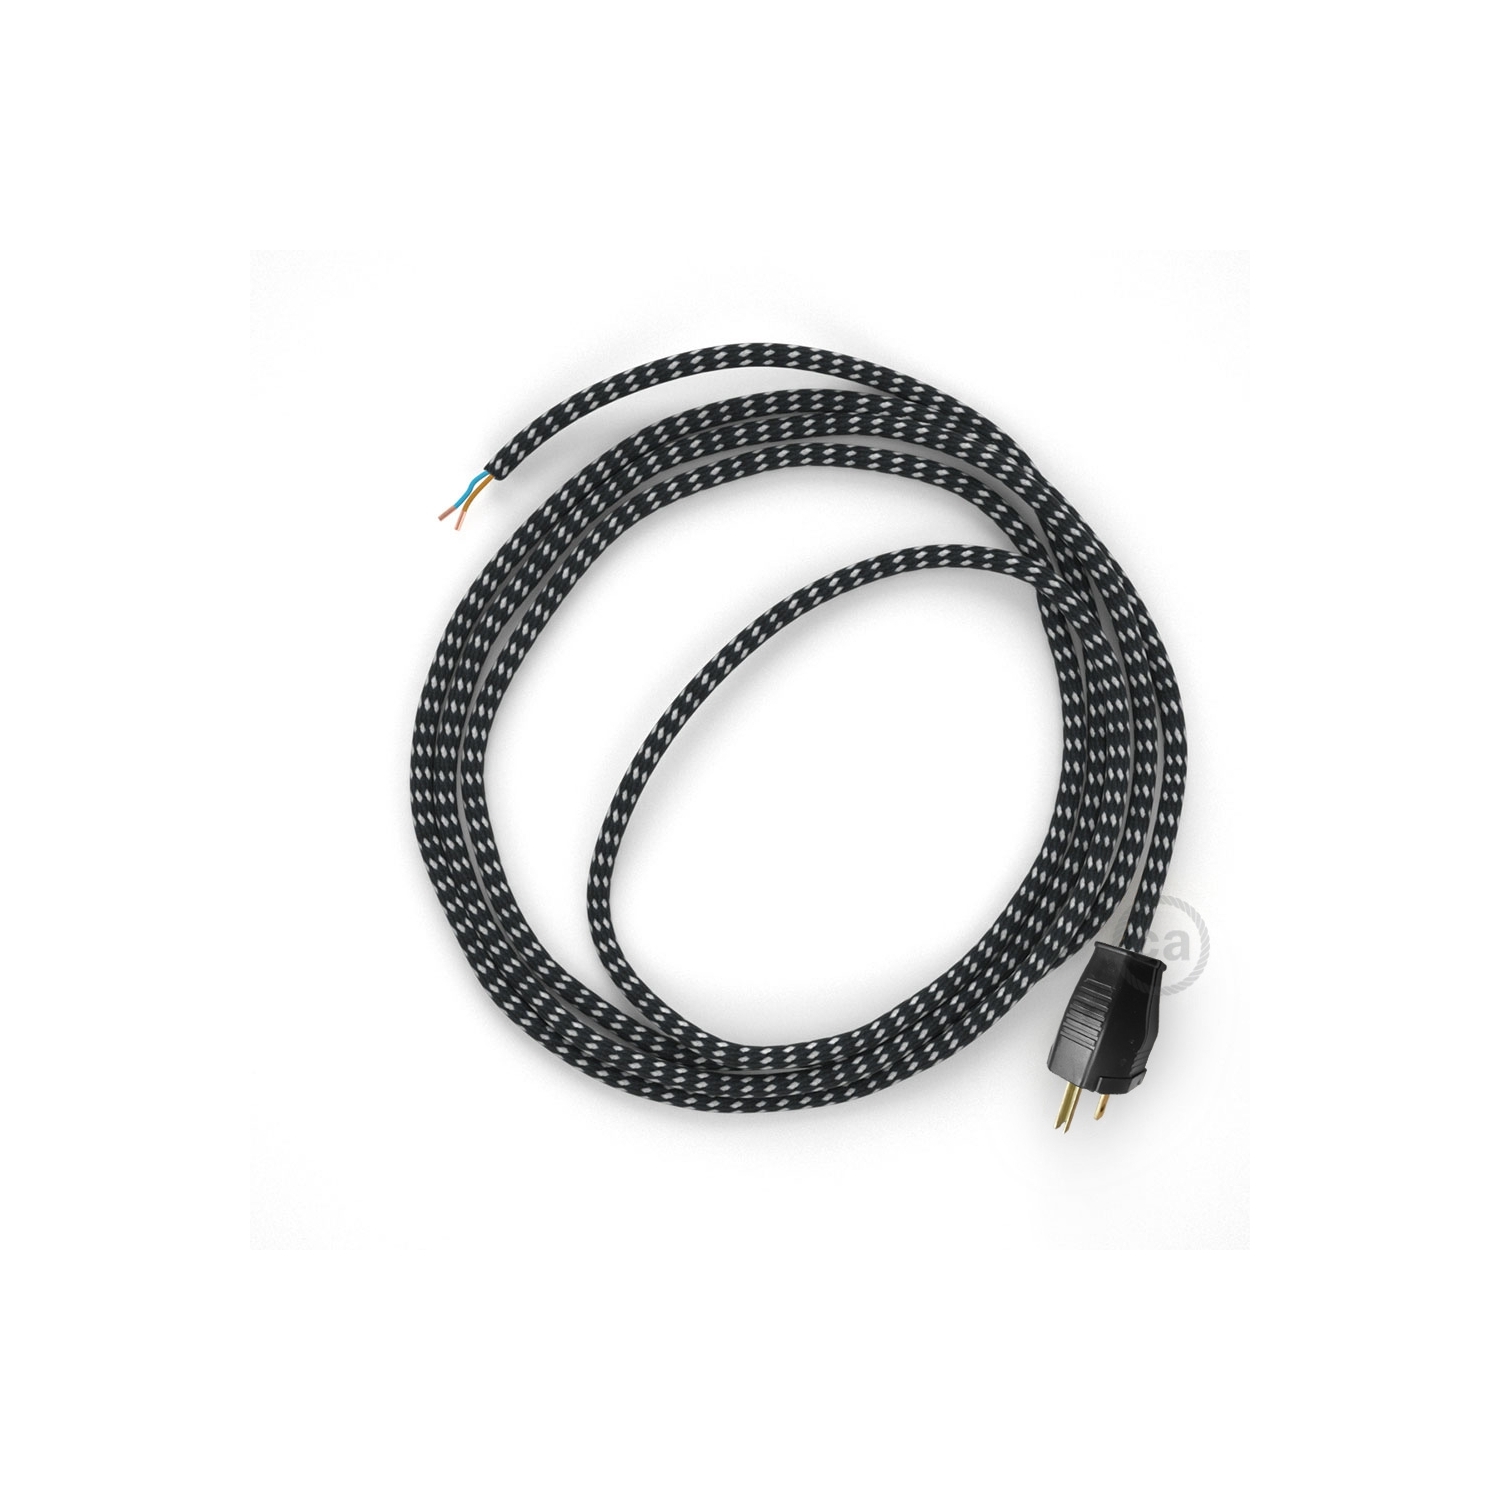 Cord-set - RT41 Black & White Tracer Covered Round Cable